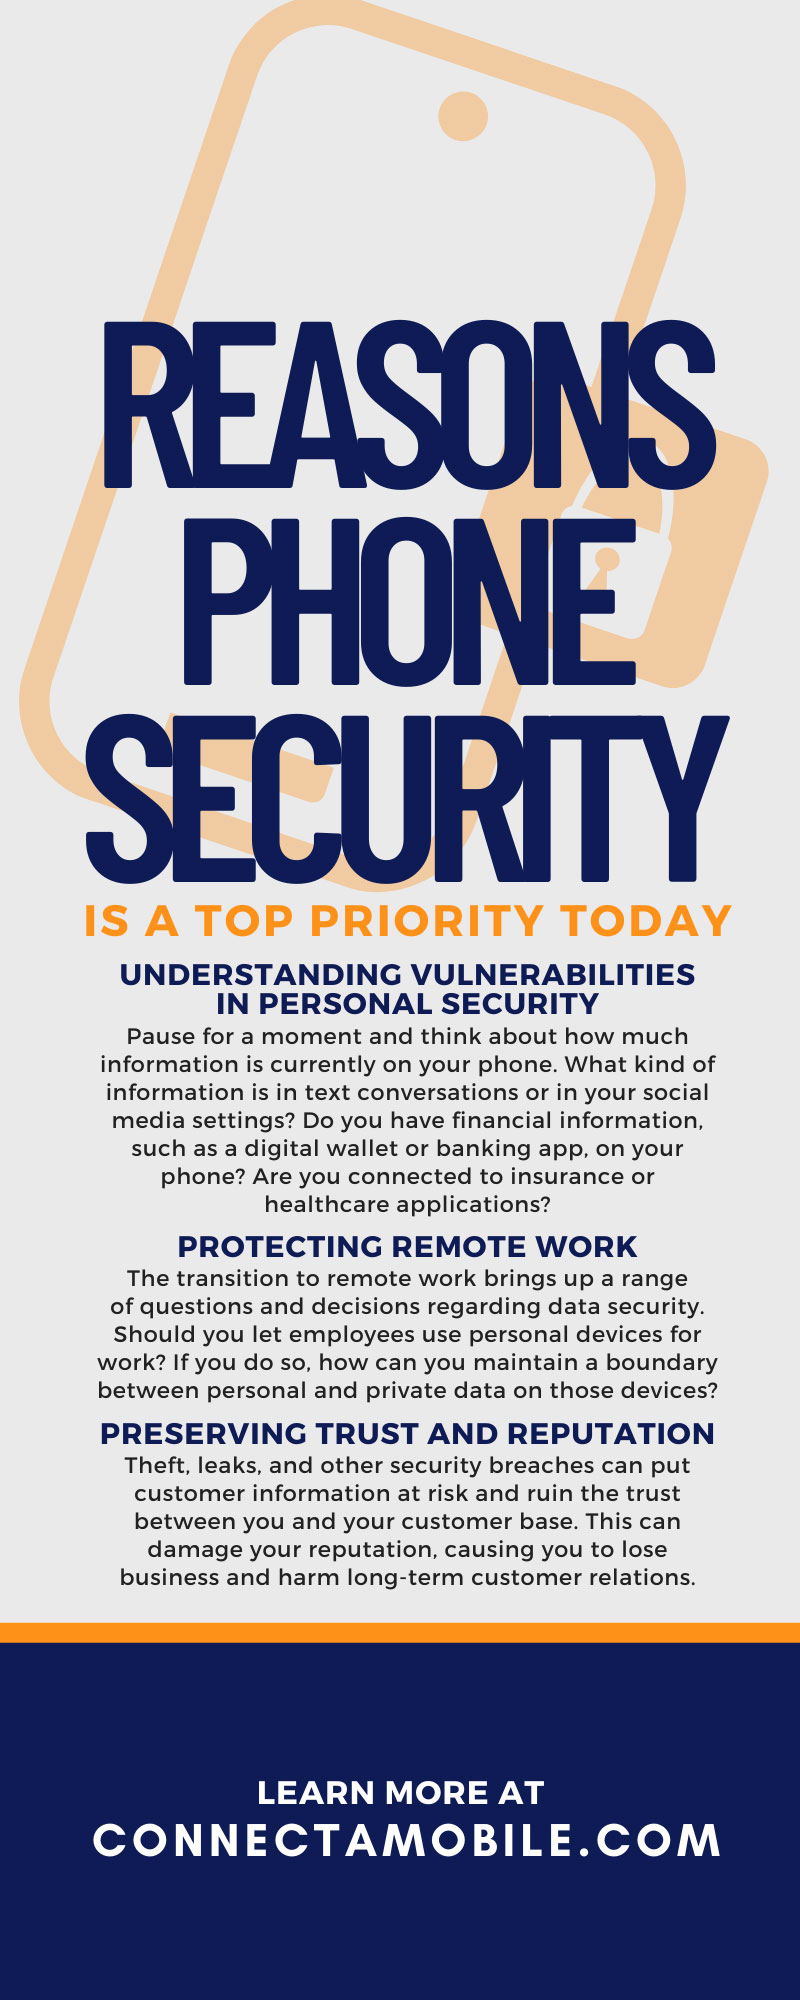 Reasons Phone Security Is a Top Priority Today
